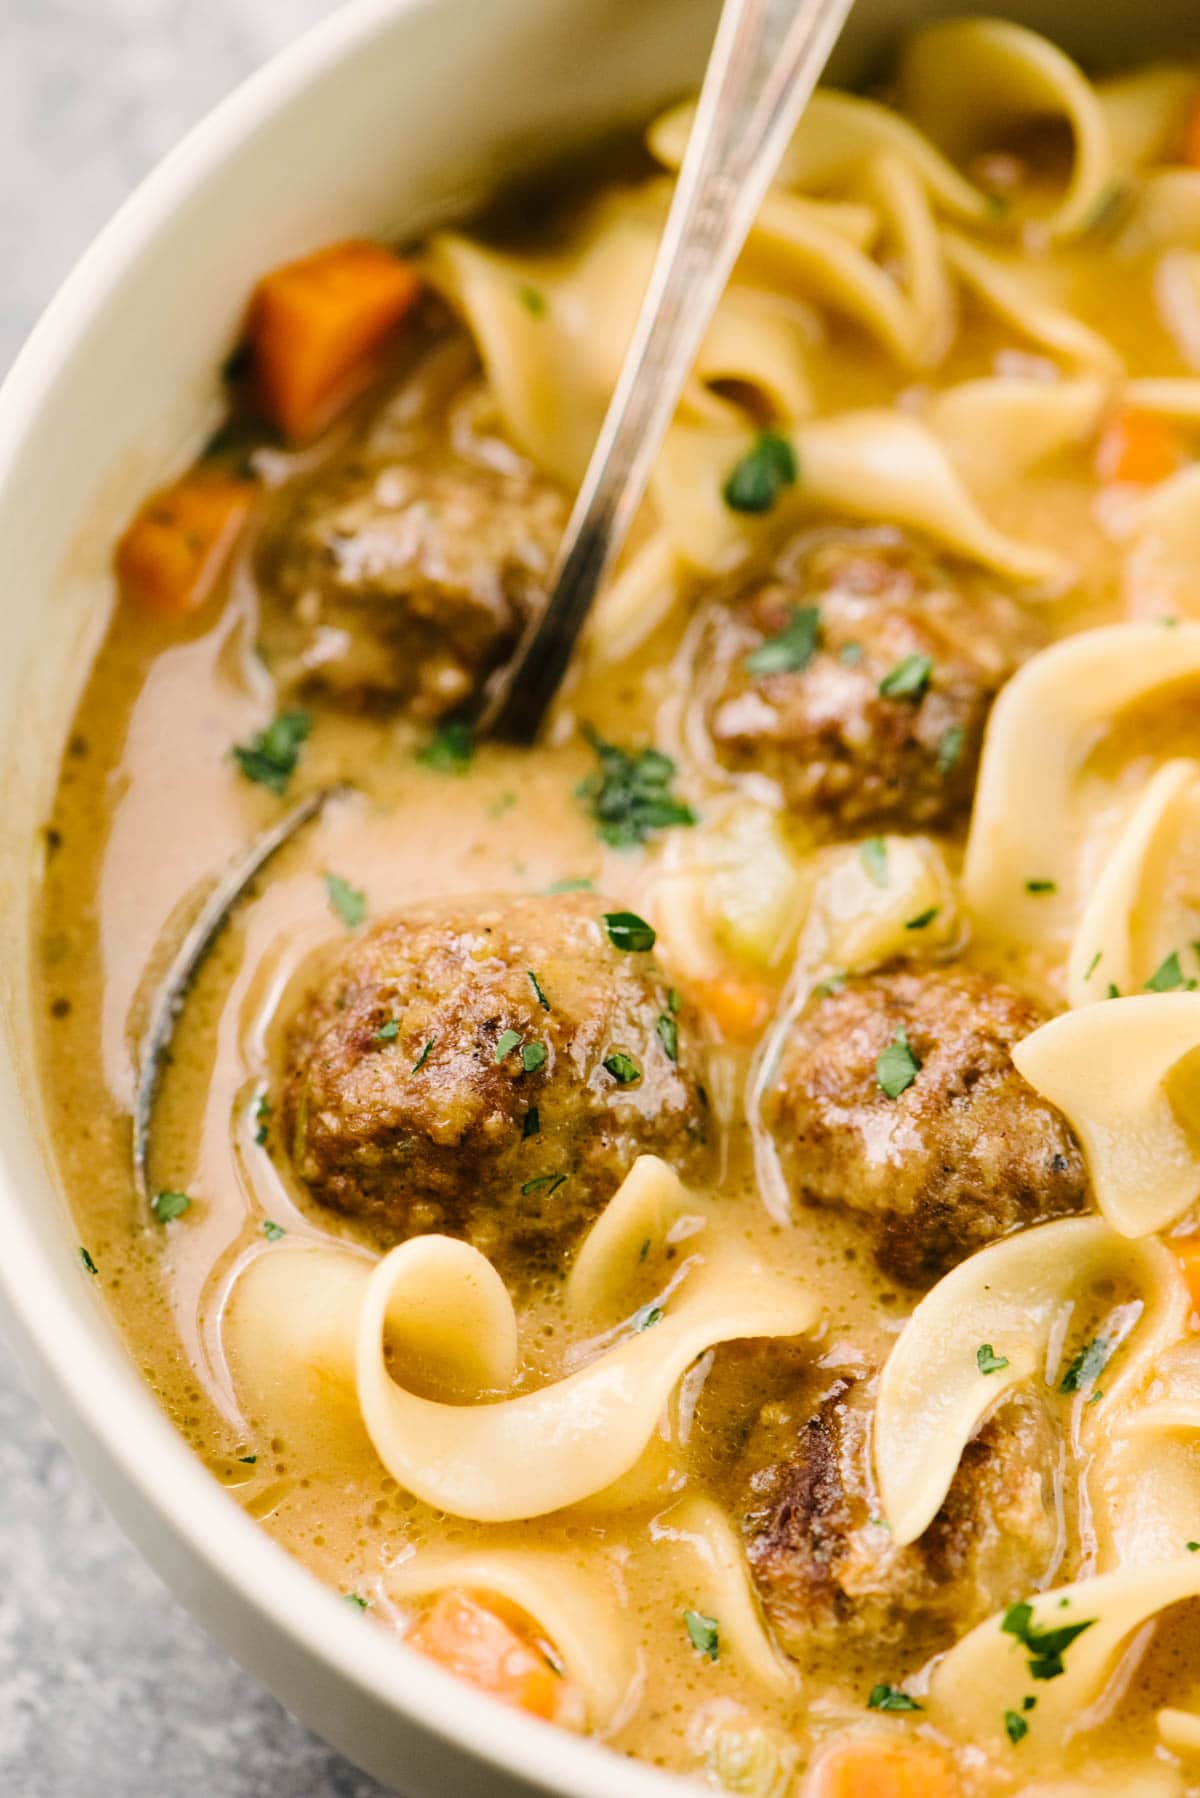 Side view, a spoon tucked into a bowl of Swedish meatball soup with egg noodles, garnished with fresh parsley.